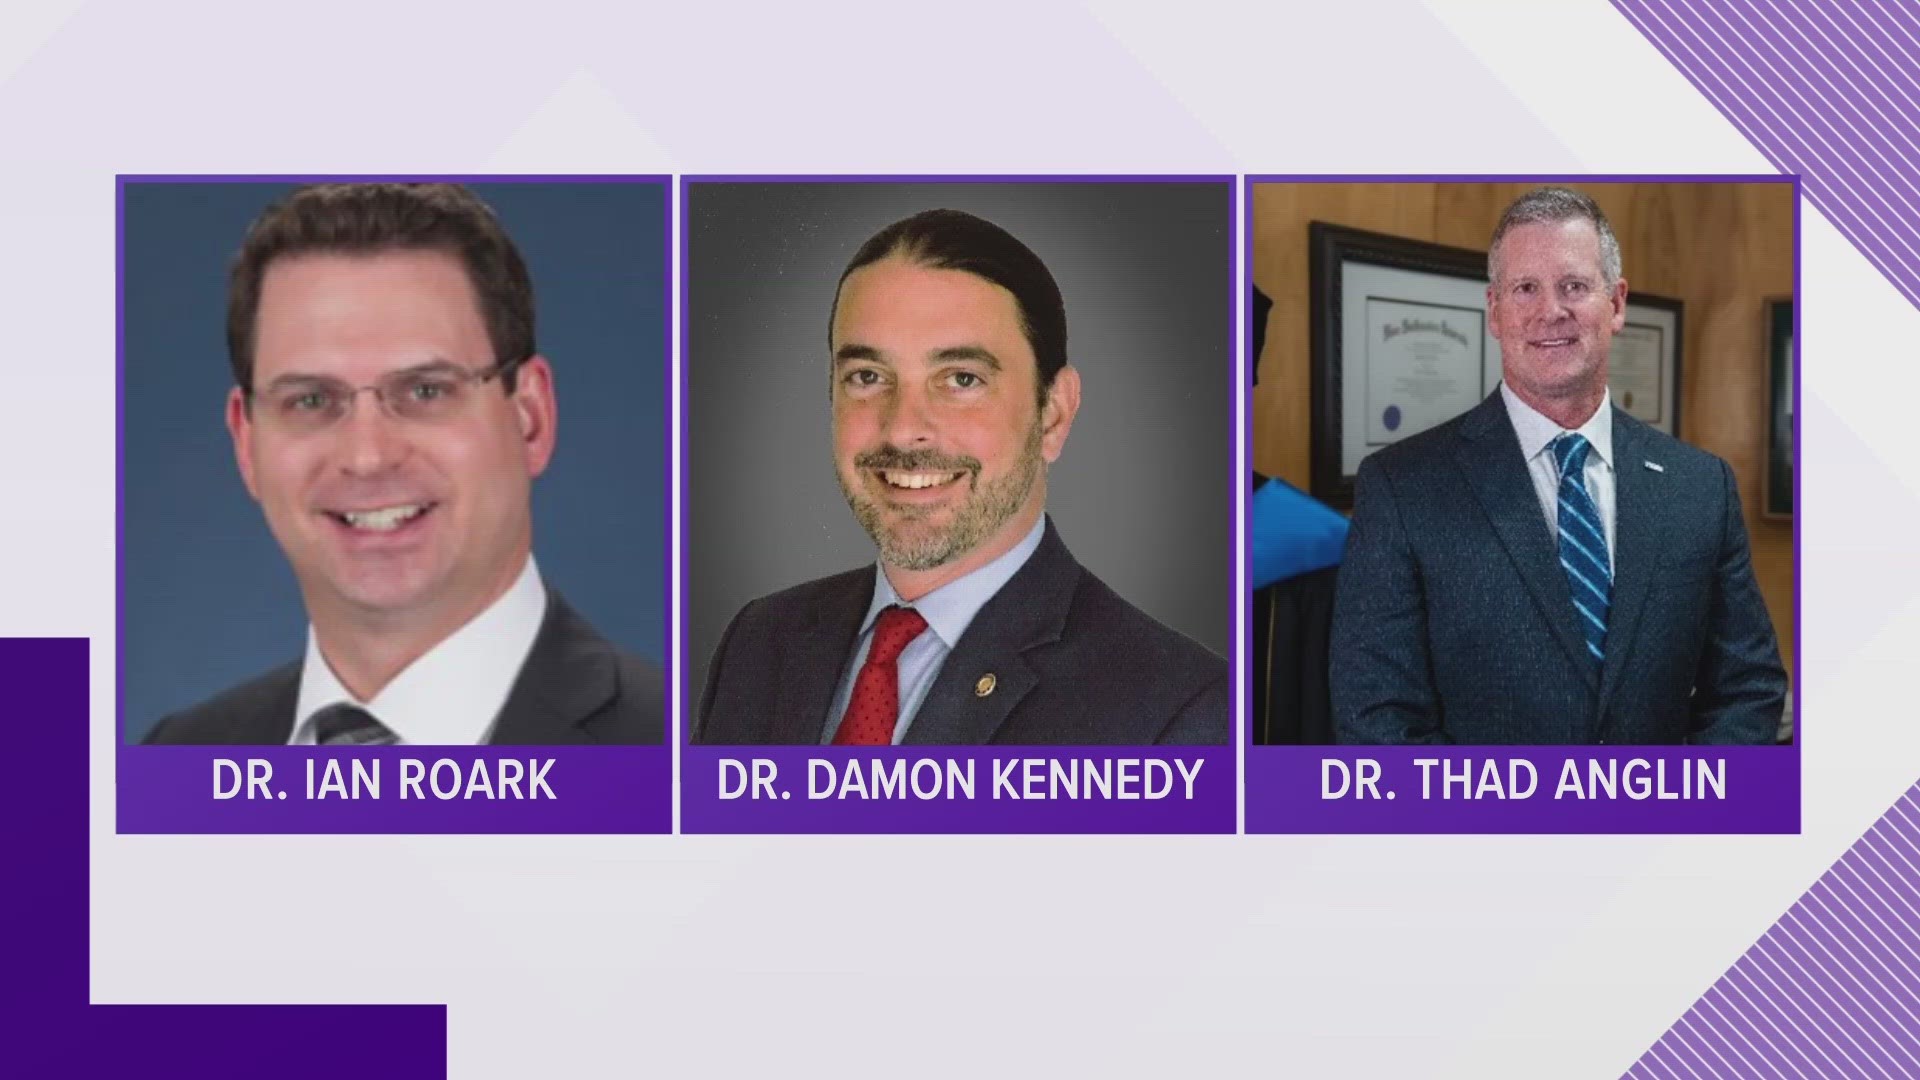 The three finalists are Dr. Thad Anglin, Dr. Ian Roark and Dr. Damon Kennedy. There will be public forums through the first week of May for each candidate.